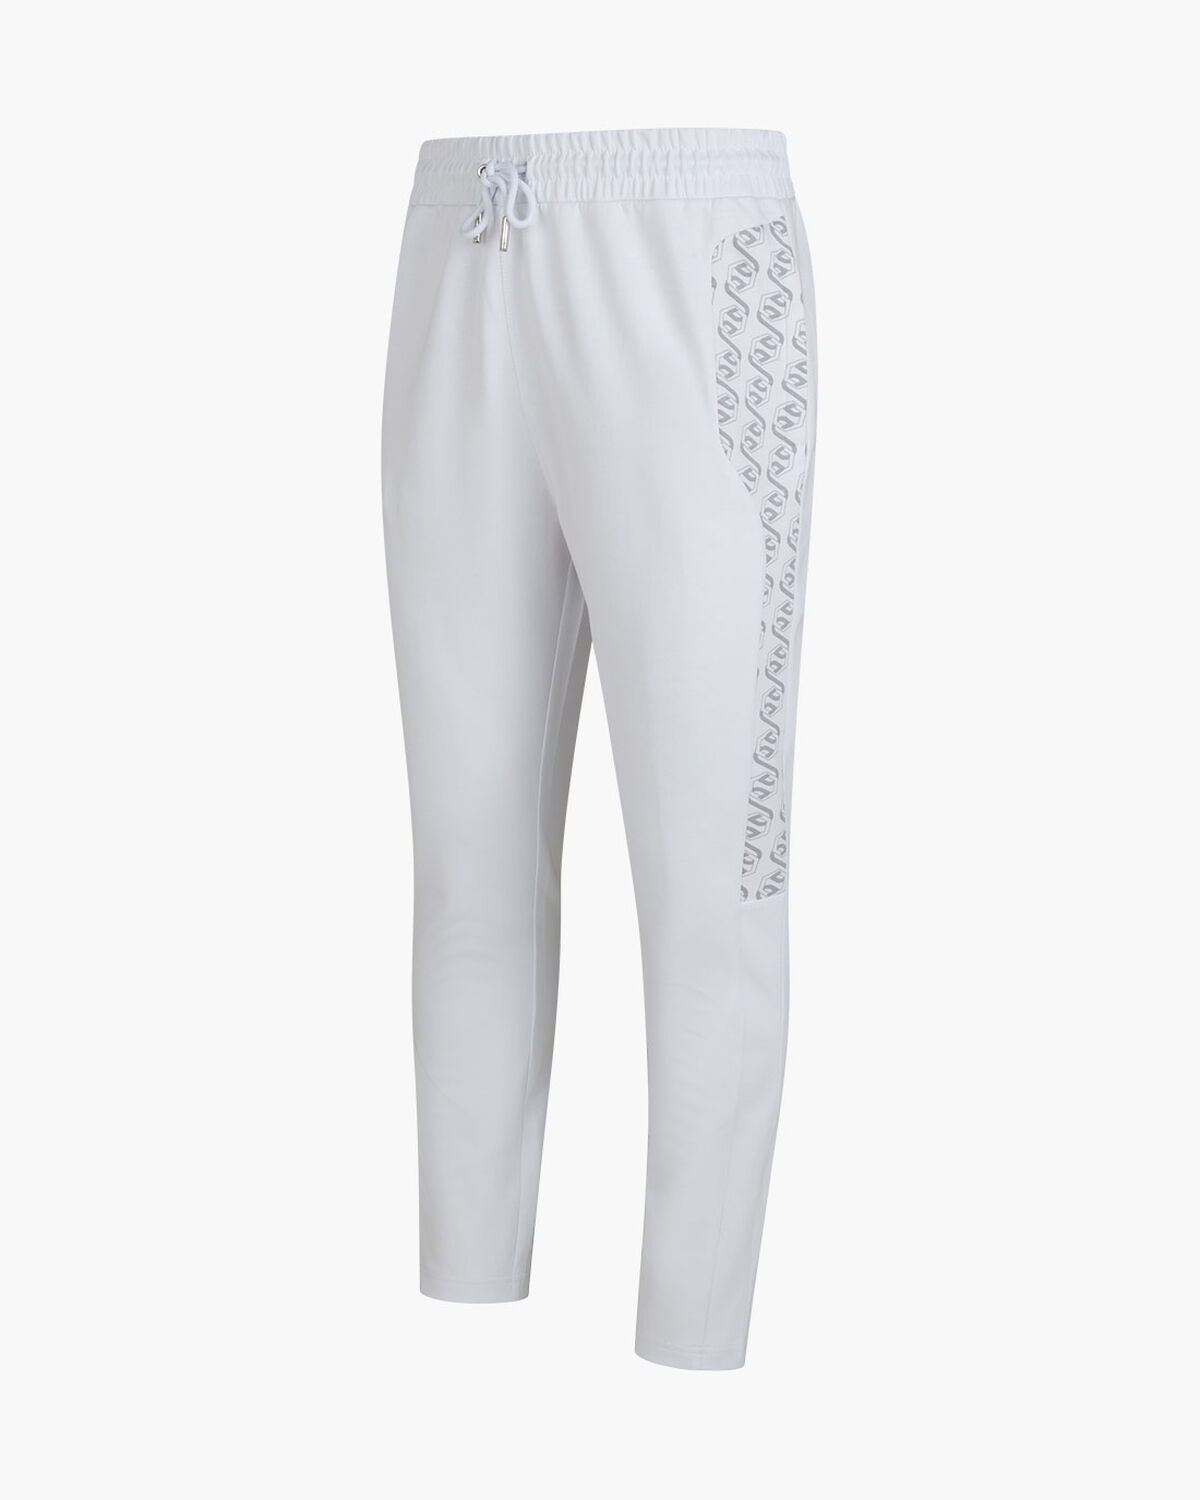 Chain Repeat Pants, White/Silver, hi-res